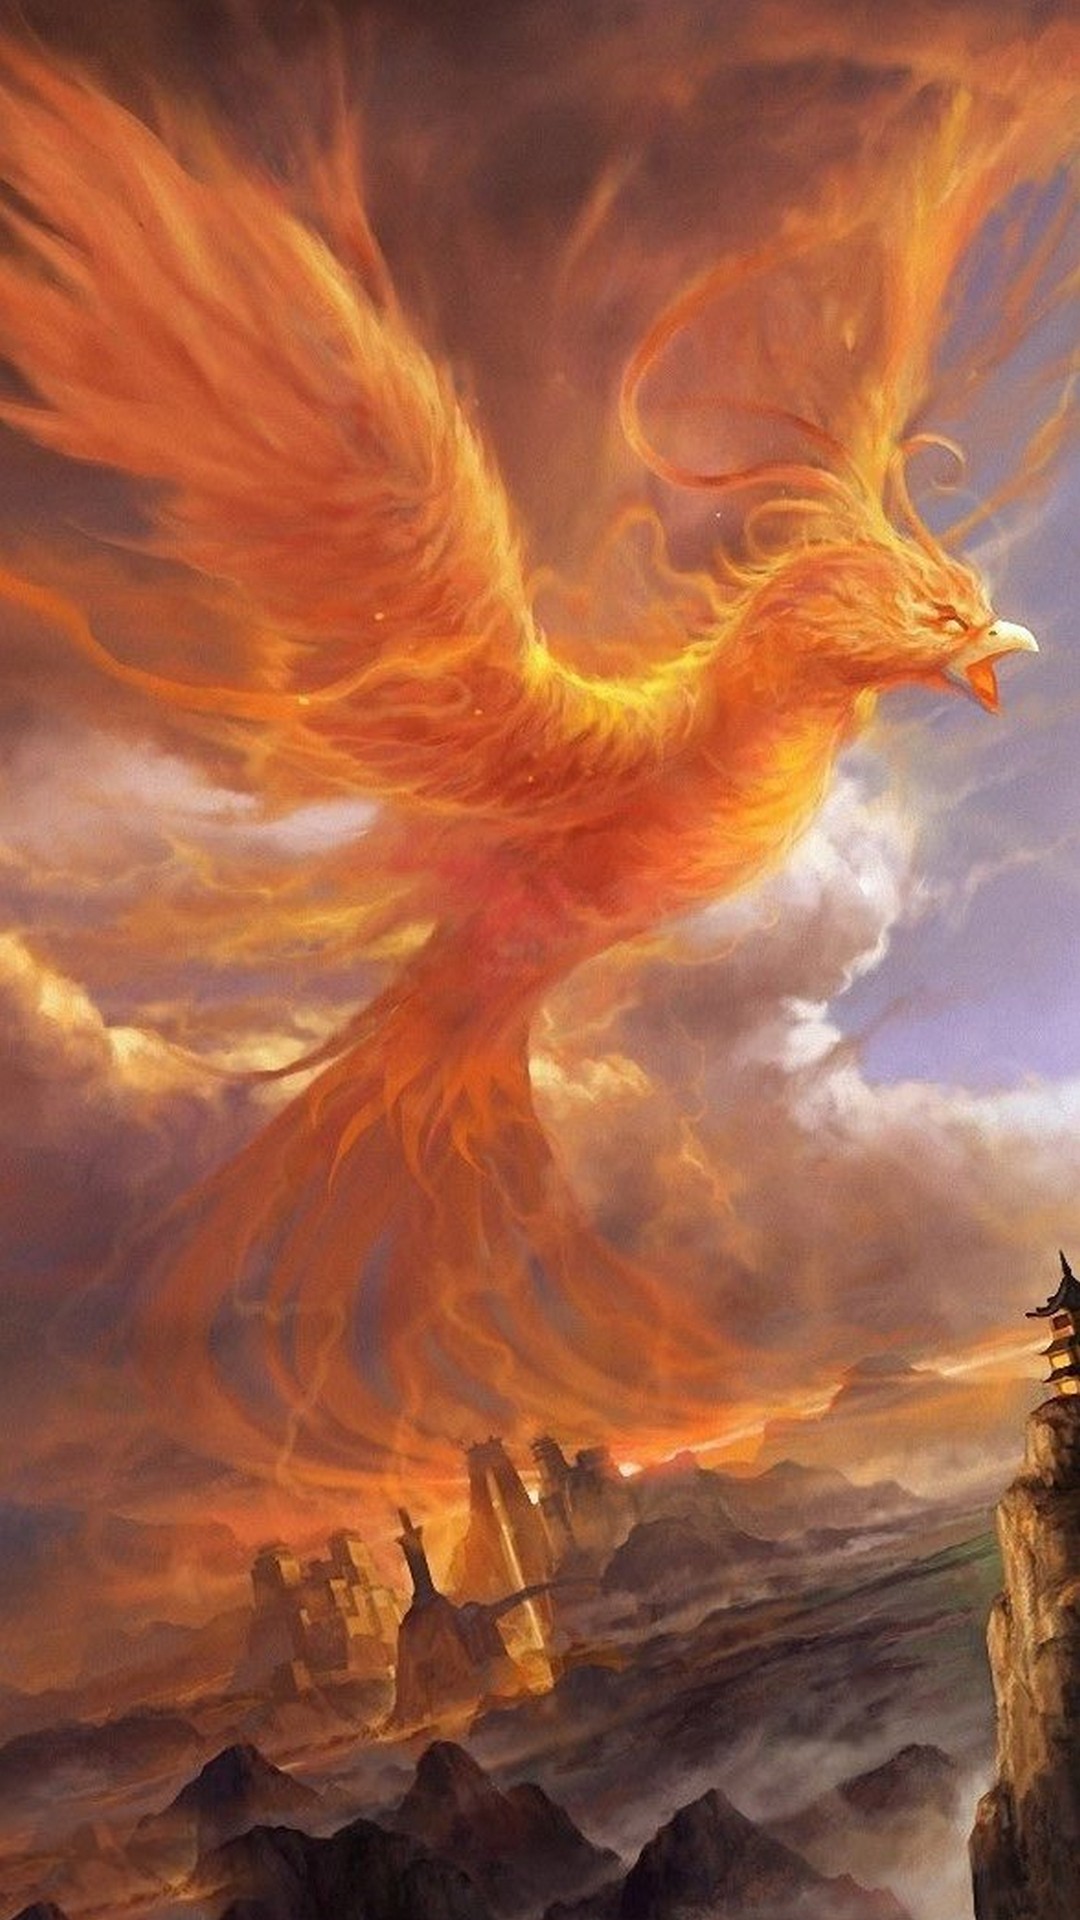 Wallpapers Phone Phoenix with resolution 1080X1920 pixel. You can make this wallpaper for your Android backgrounds, Tablet, Smartphones Screensavers and Mobile Phone Lock Screen